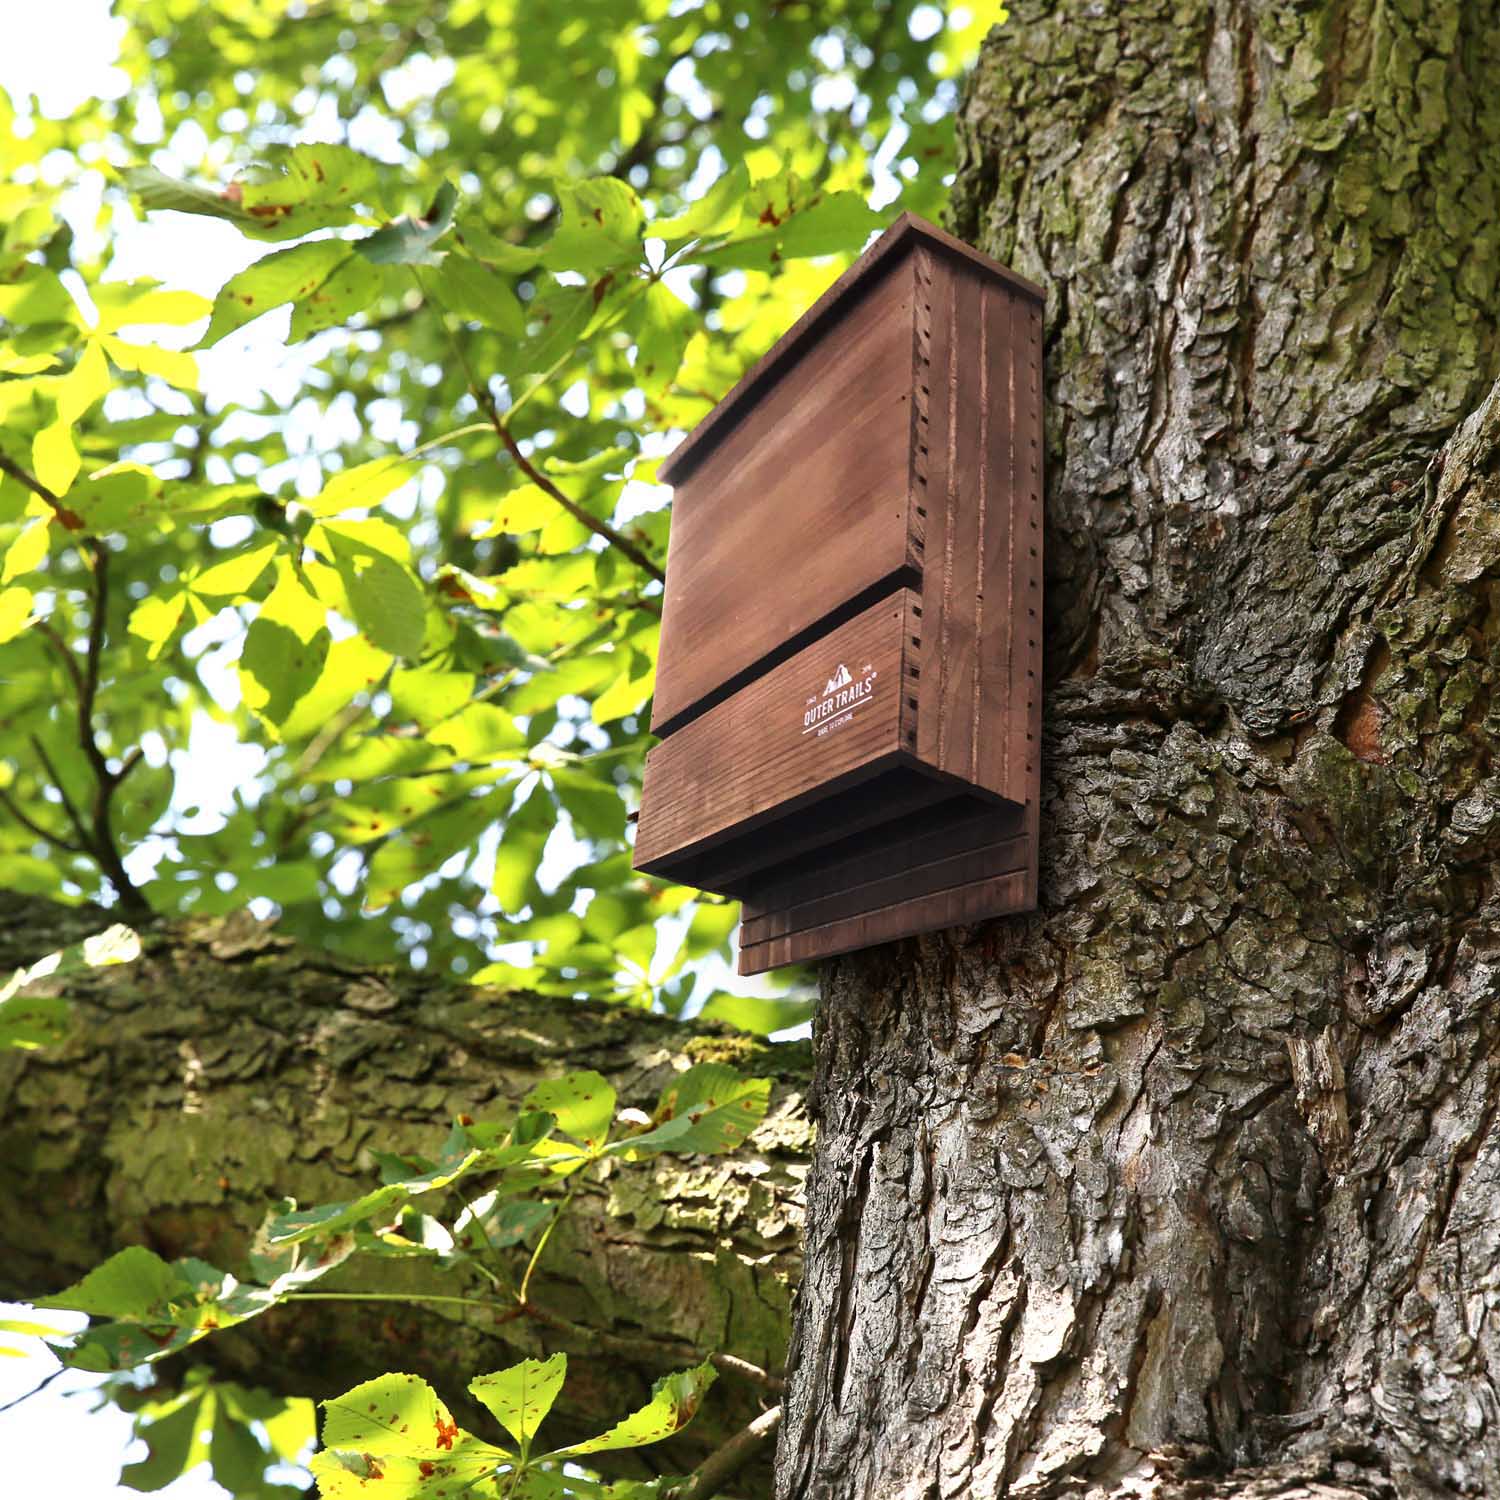 Outer Trails™ Multi Chamber Bat House installed on a tree in a natural habitat